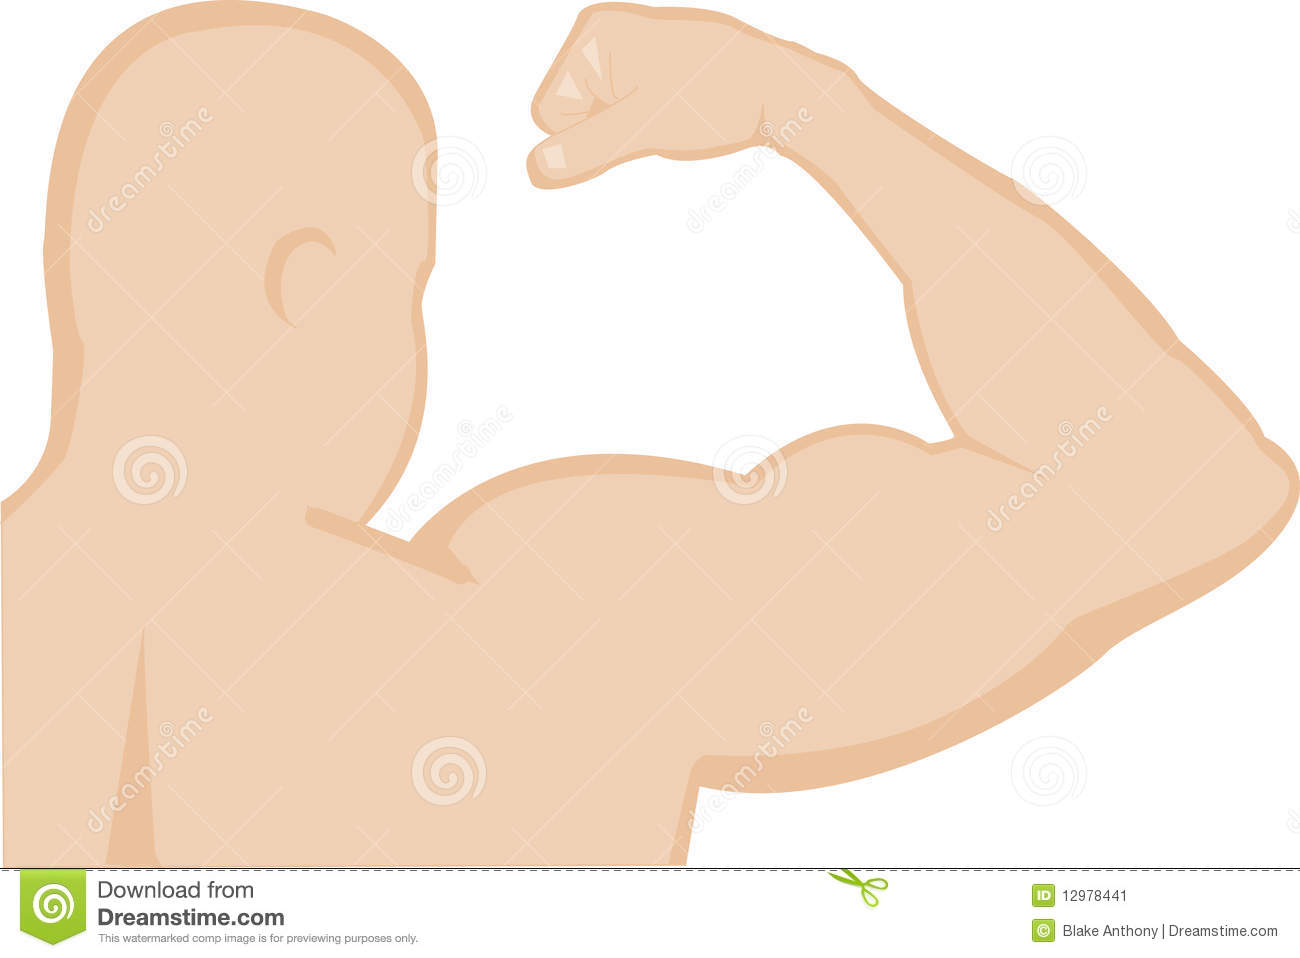 Man S Arm Flexing Bicep Muscle Stock Image   Image  12978441